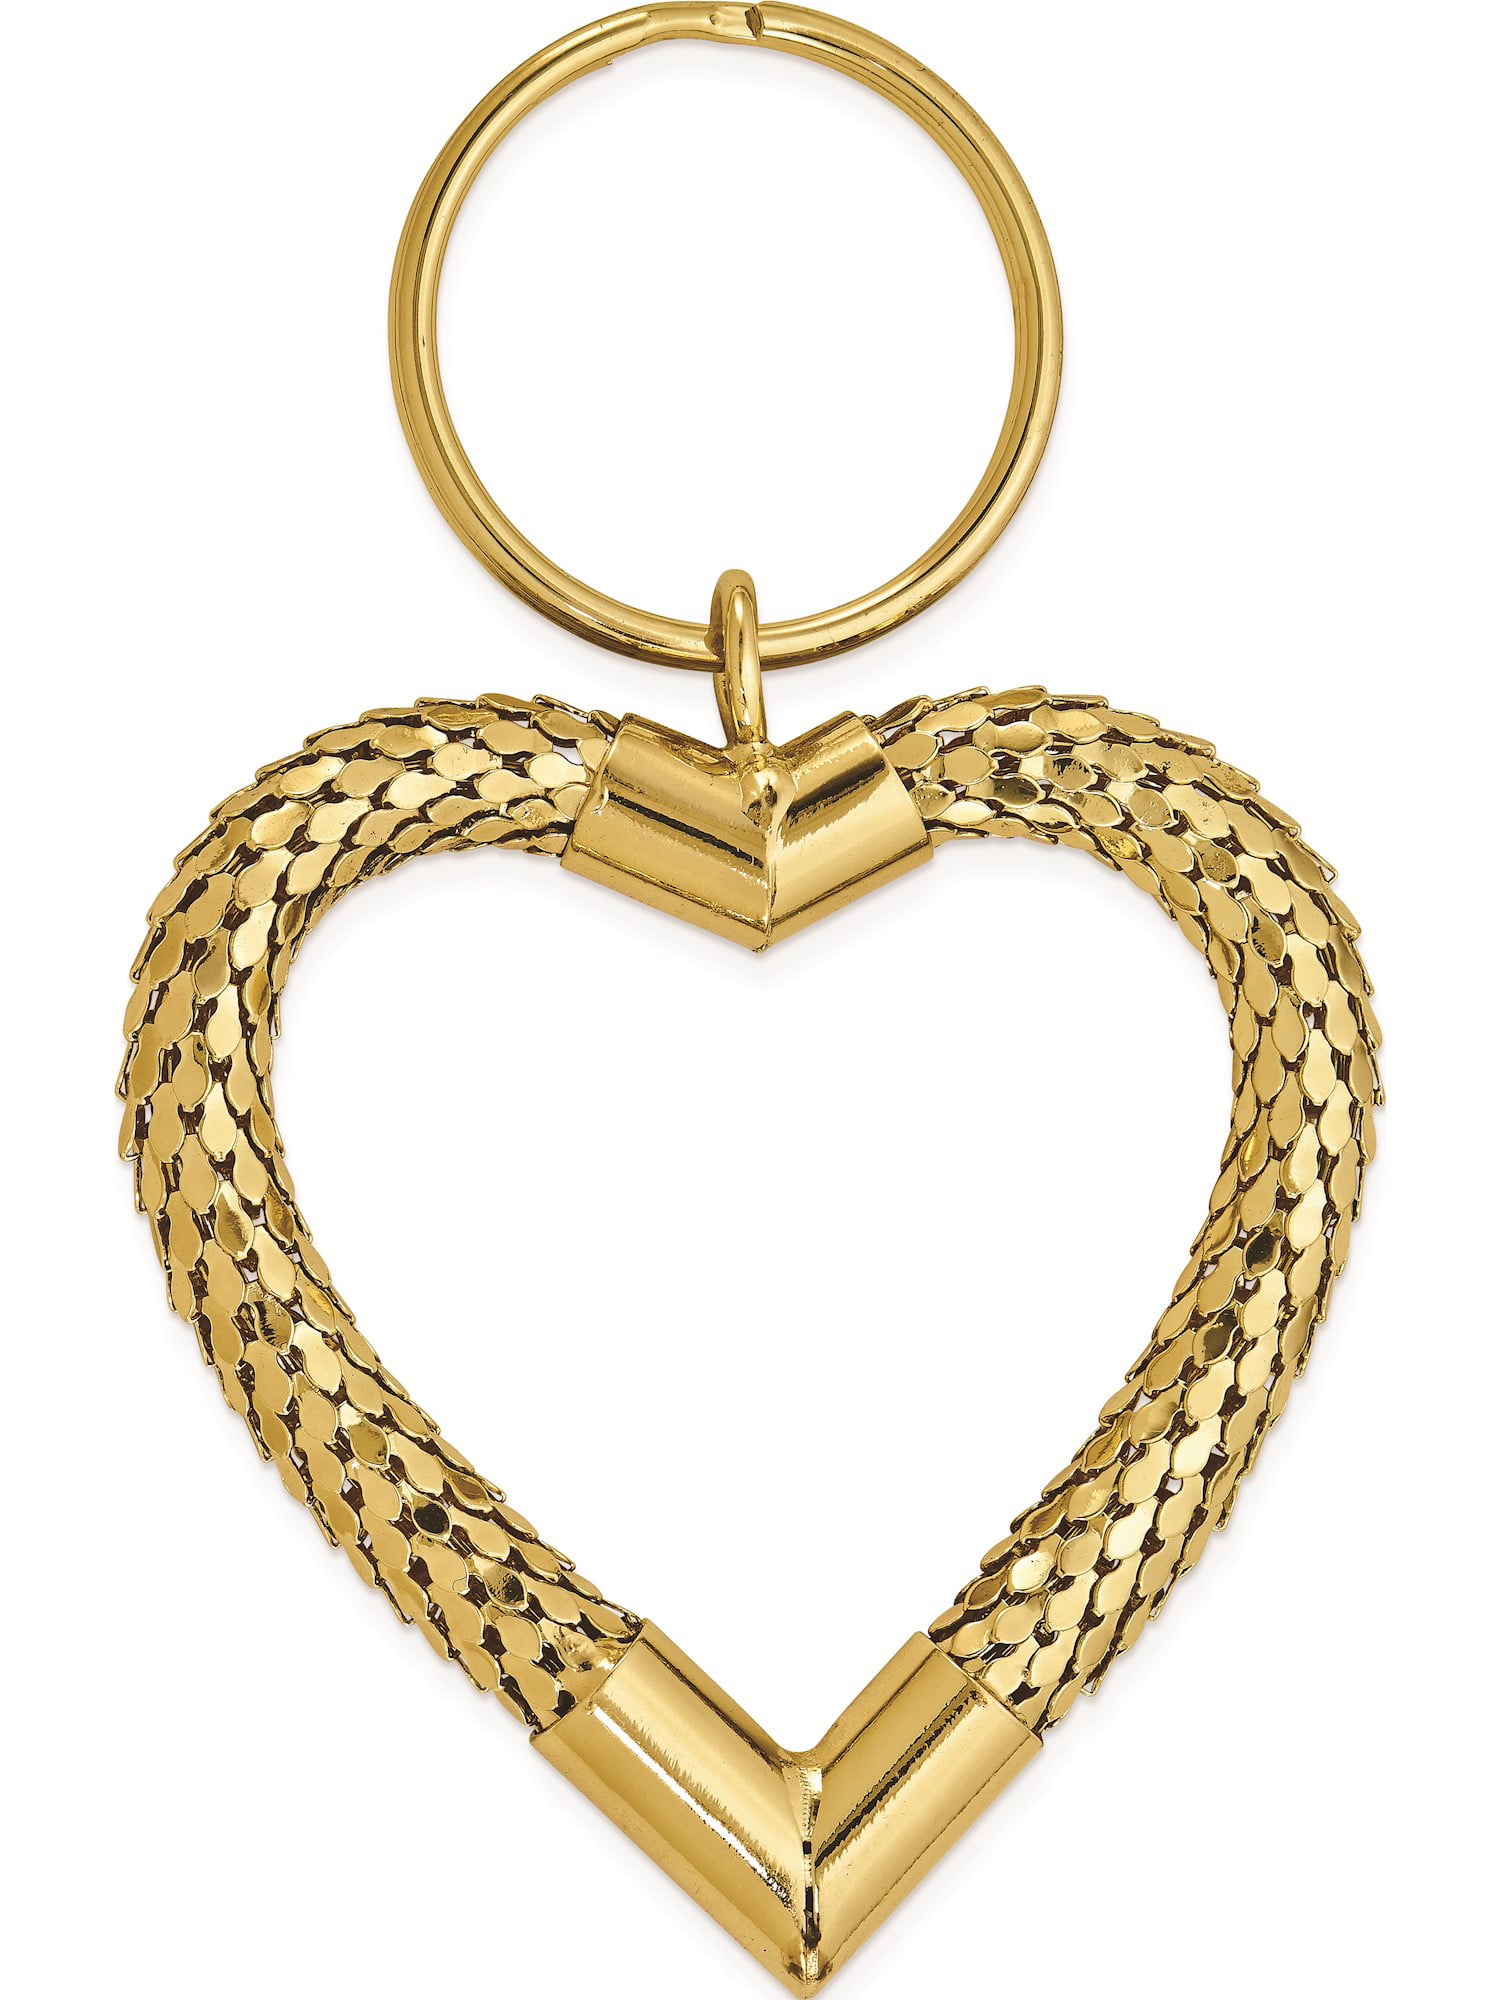 Vintage Gold Large Heart with Pearl Metal Mesh Jewelry Keychain